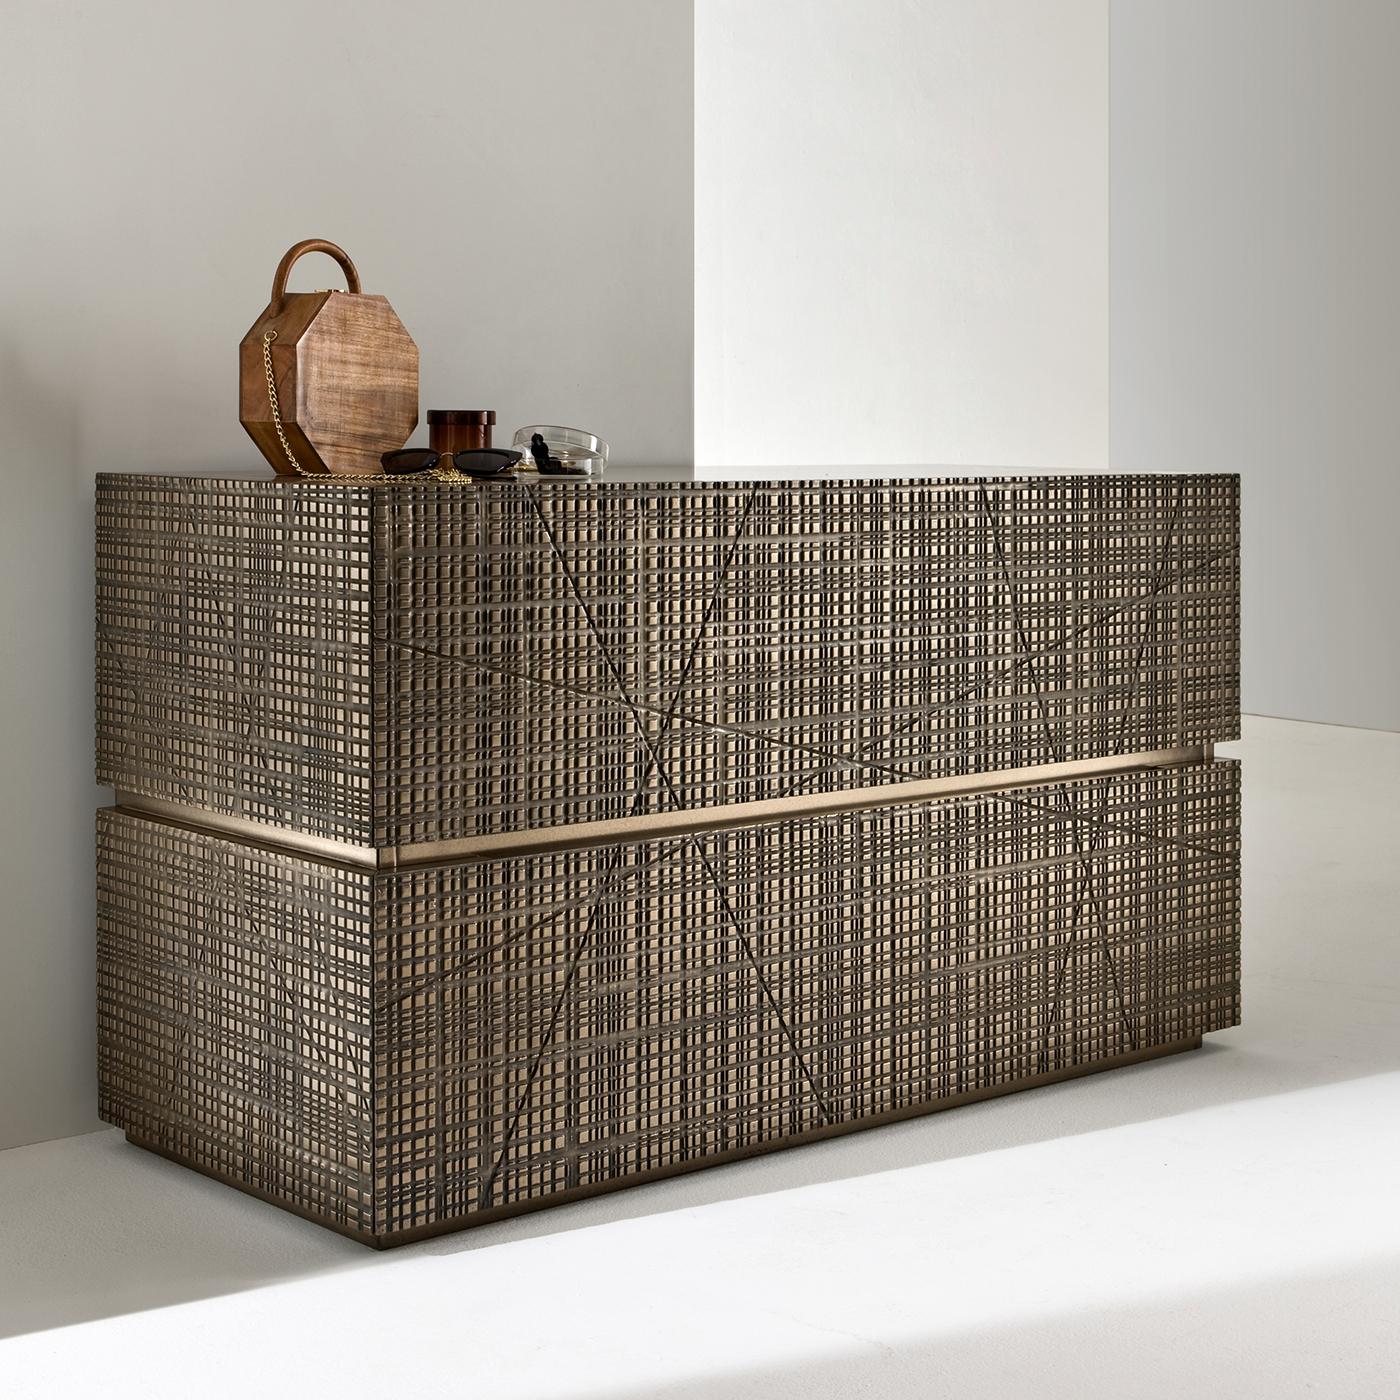 Part of the Maxima collection, this stunning chest of drawers is a superb object of functional decor. The distinctive element of this piece is the carved front, featuring an abstract series of cuts with a Liquid Metal finish in light bronze. The